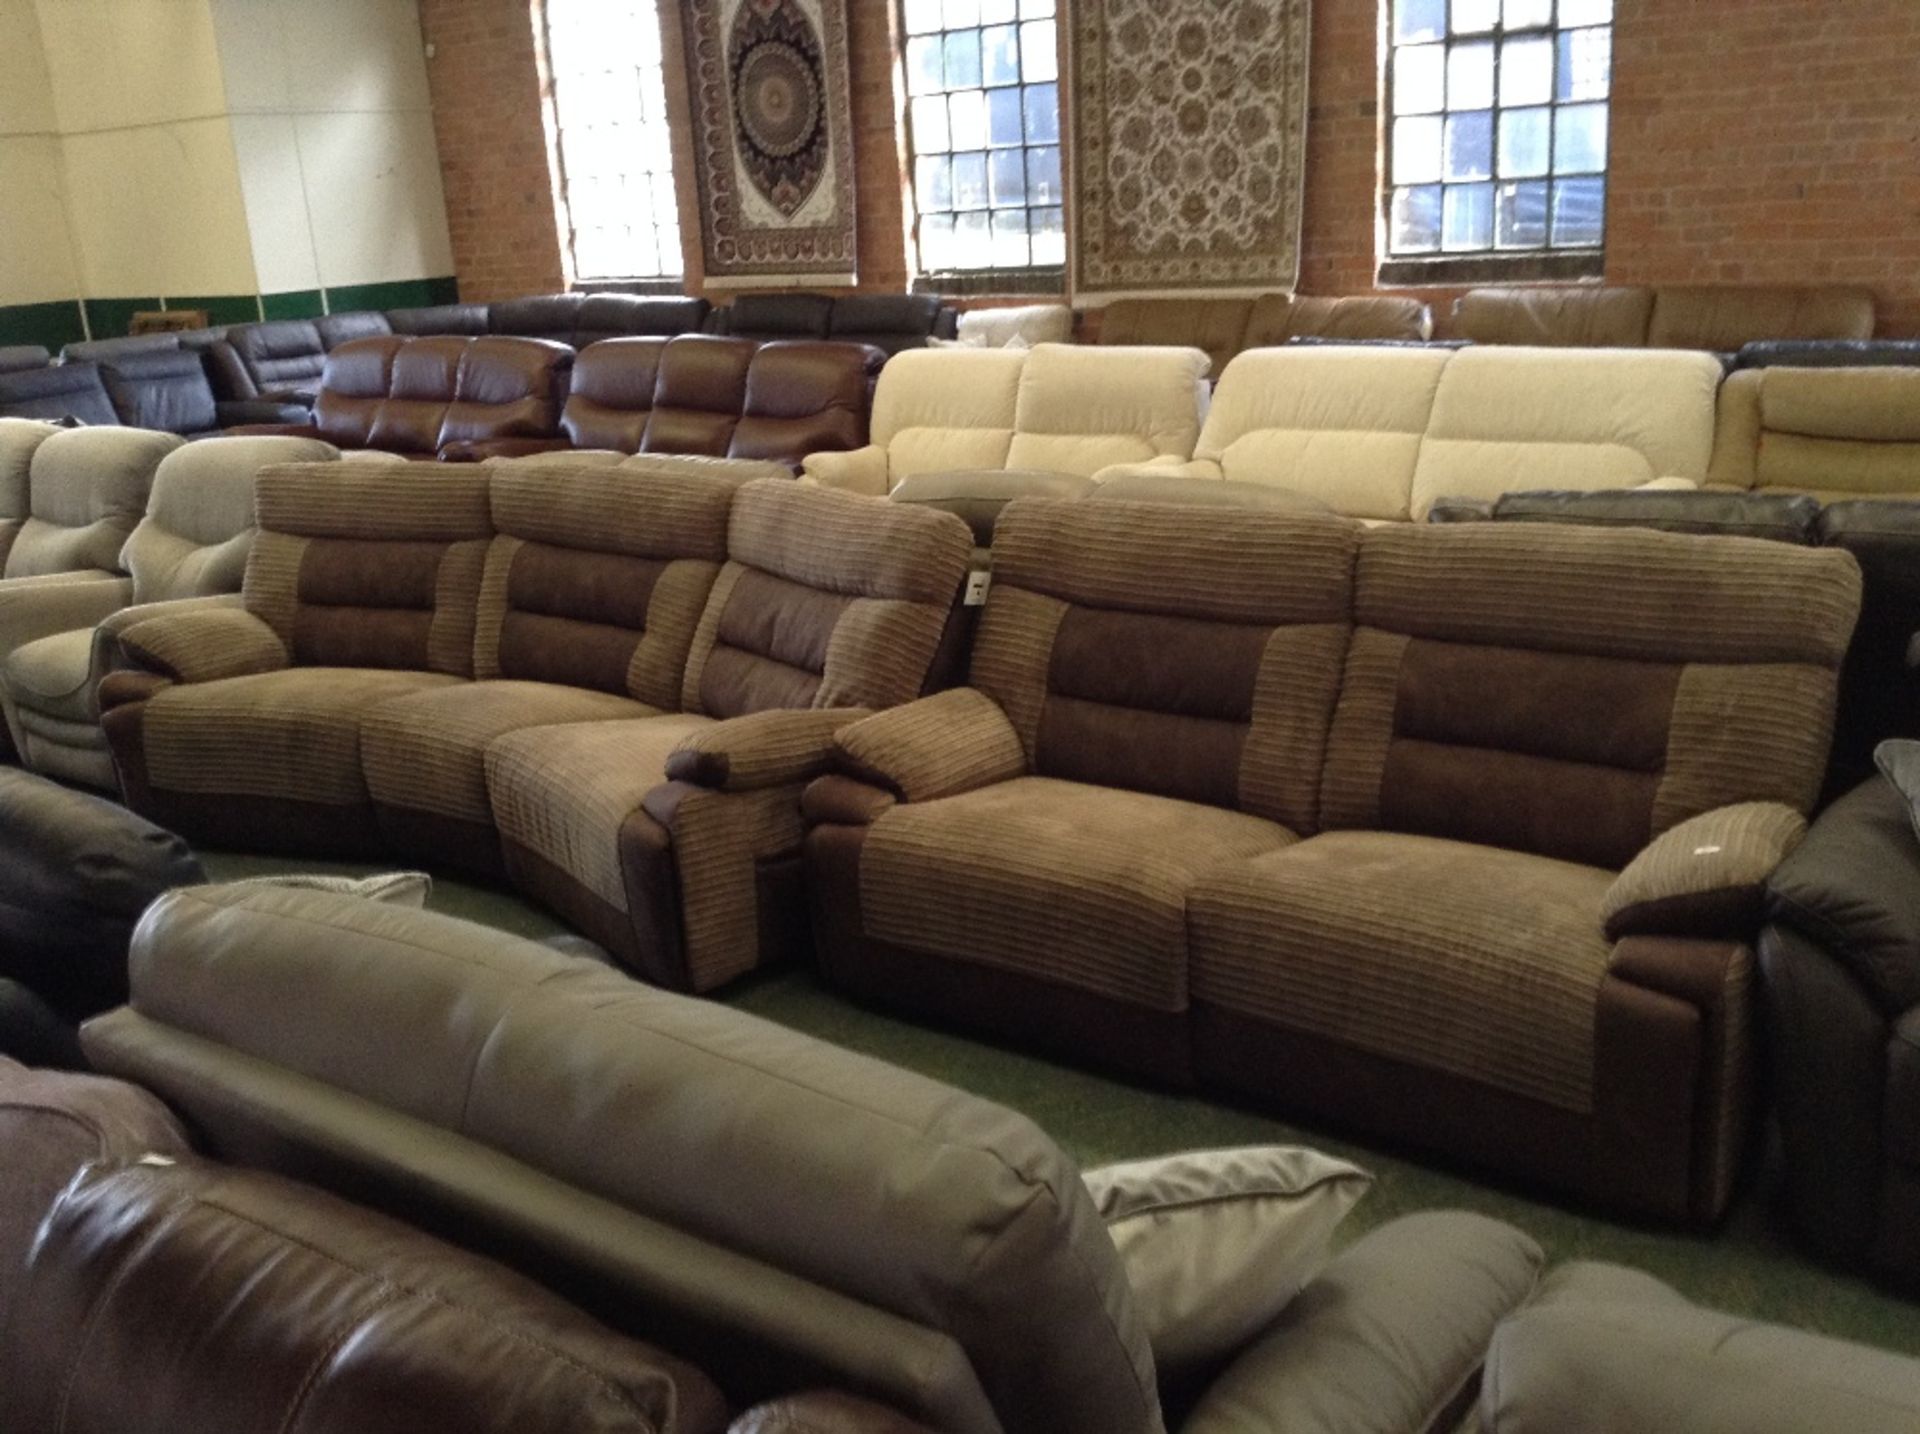 NUTMEG AND BROWN CORD ELECTRIC RECLINING 4 SEATER